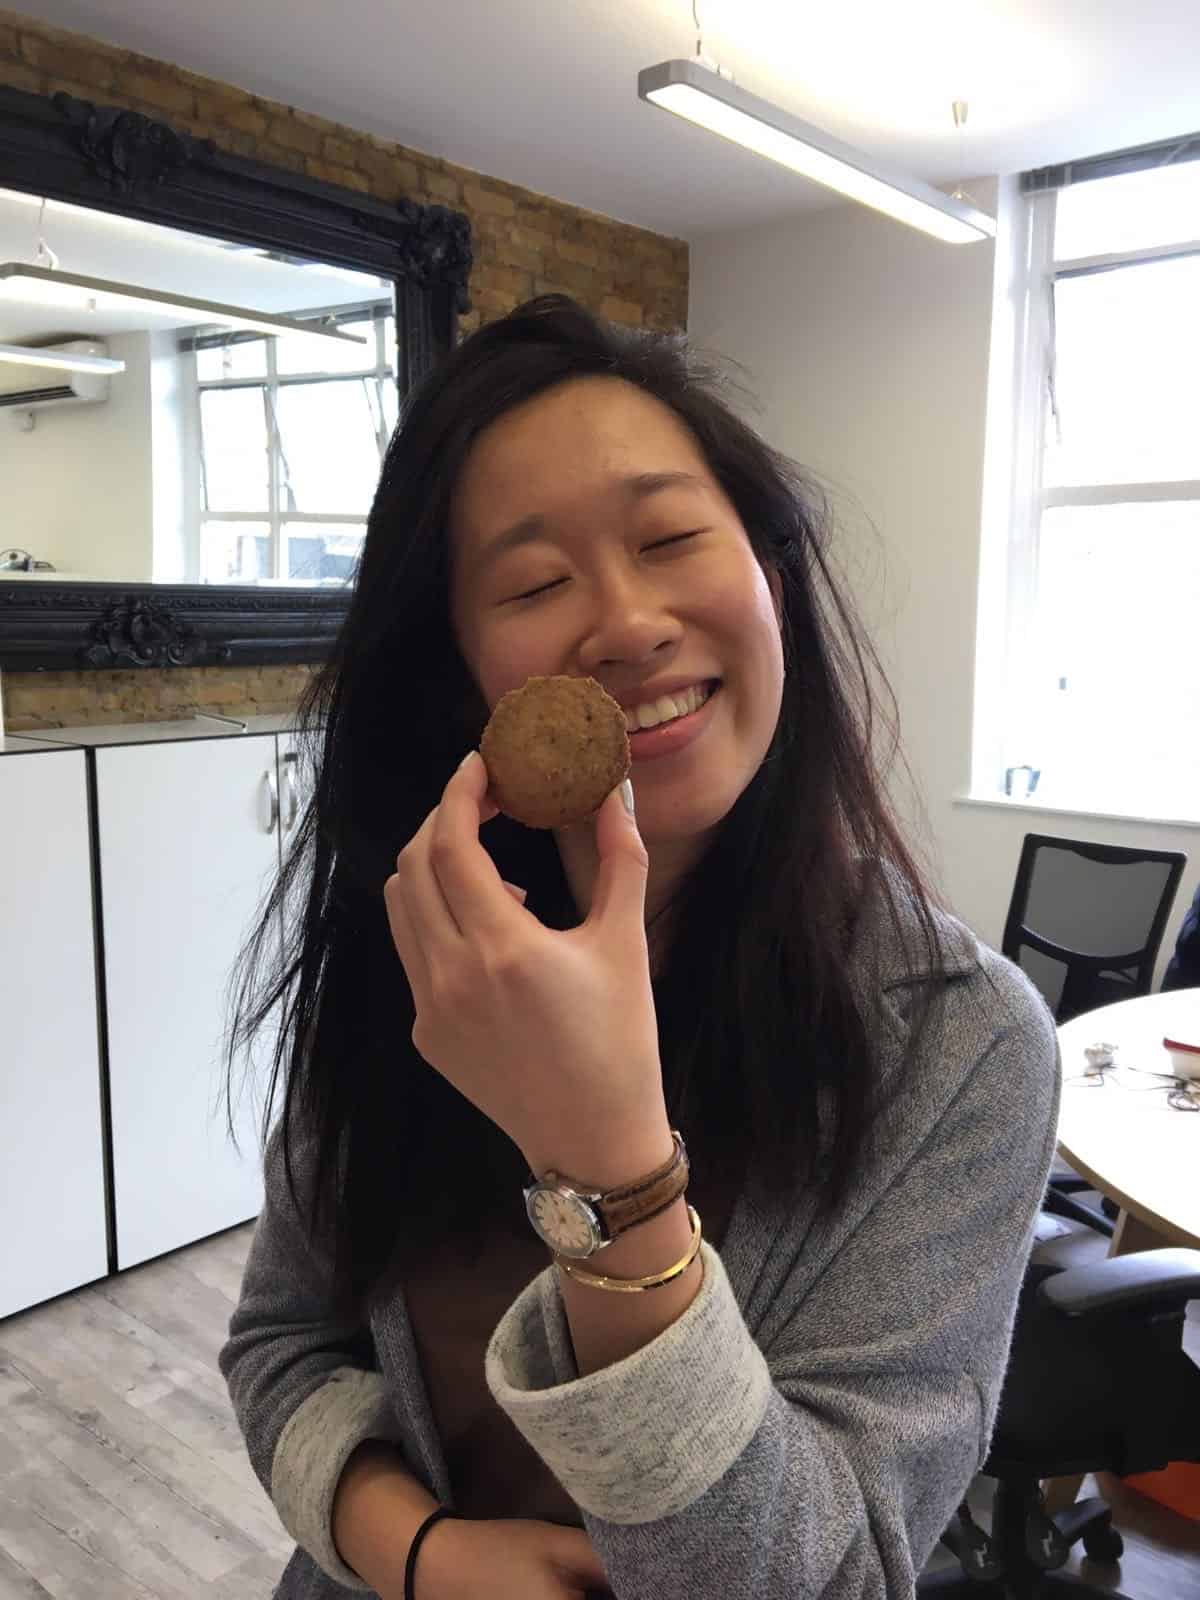 Woman smiling with a cookie held against her face